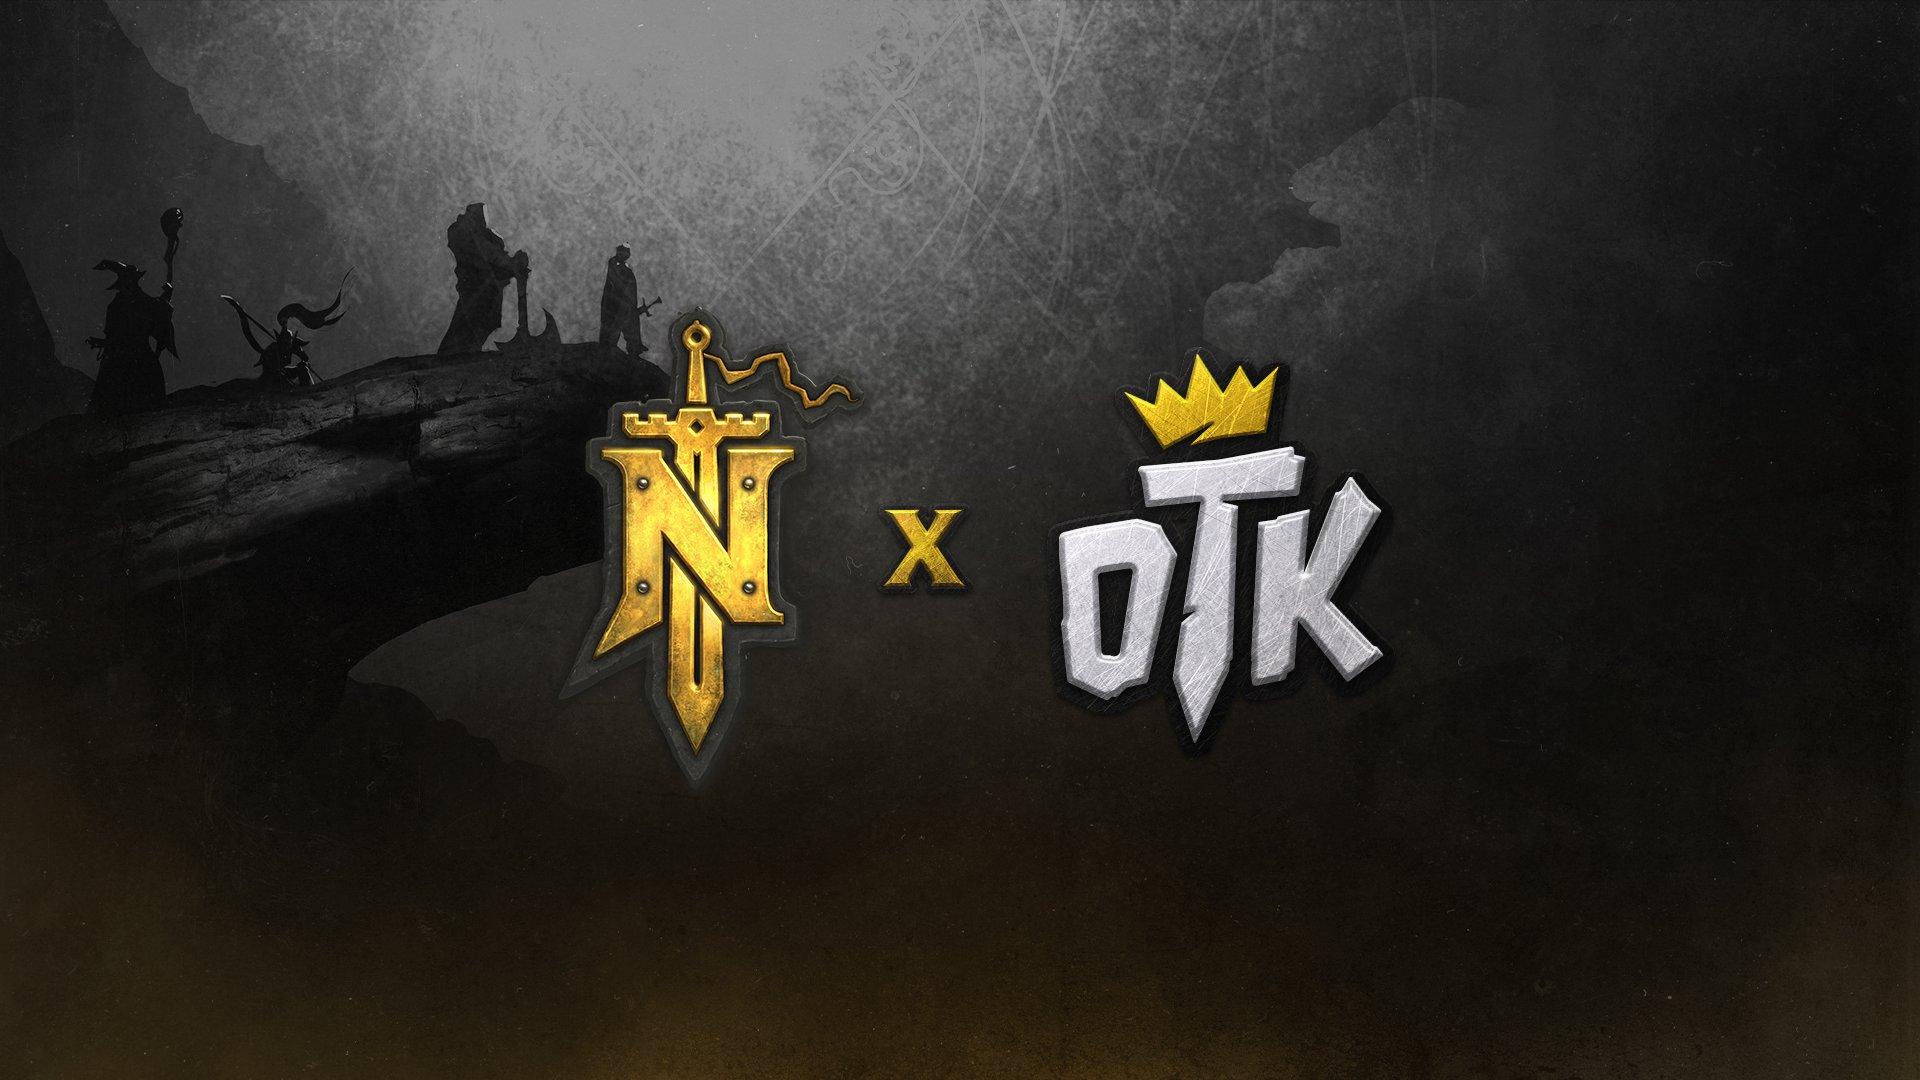 otk one true king partners with notorious studios